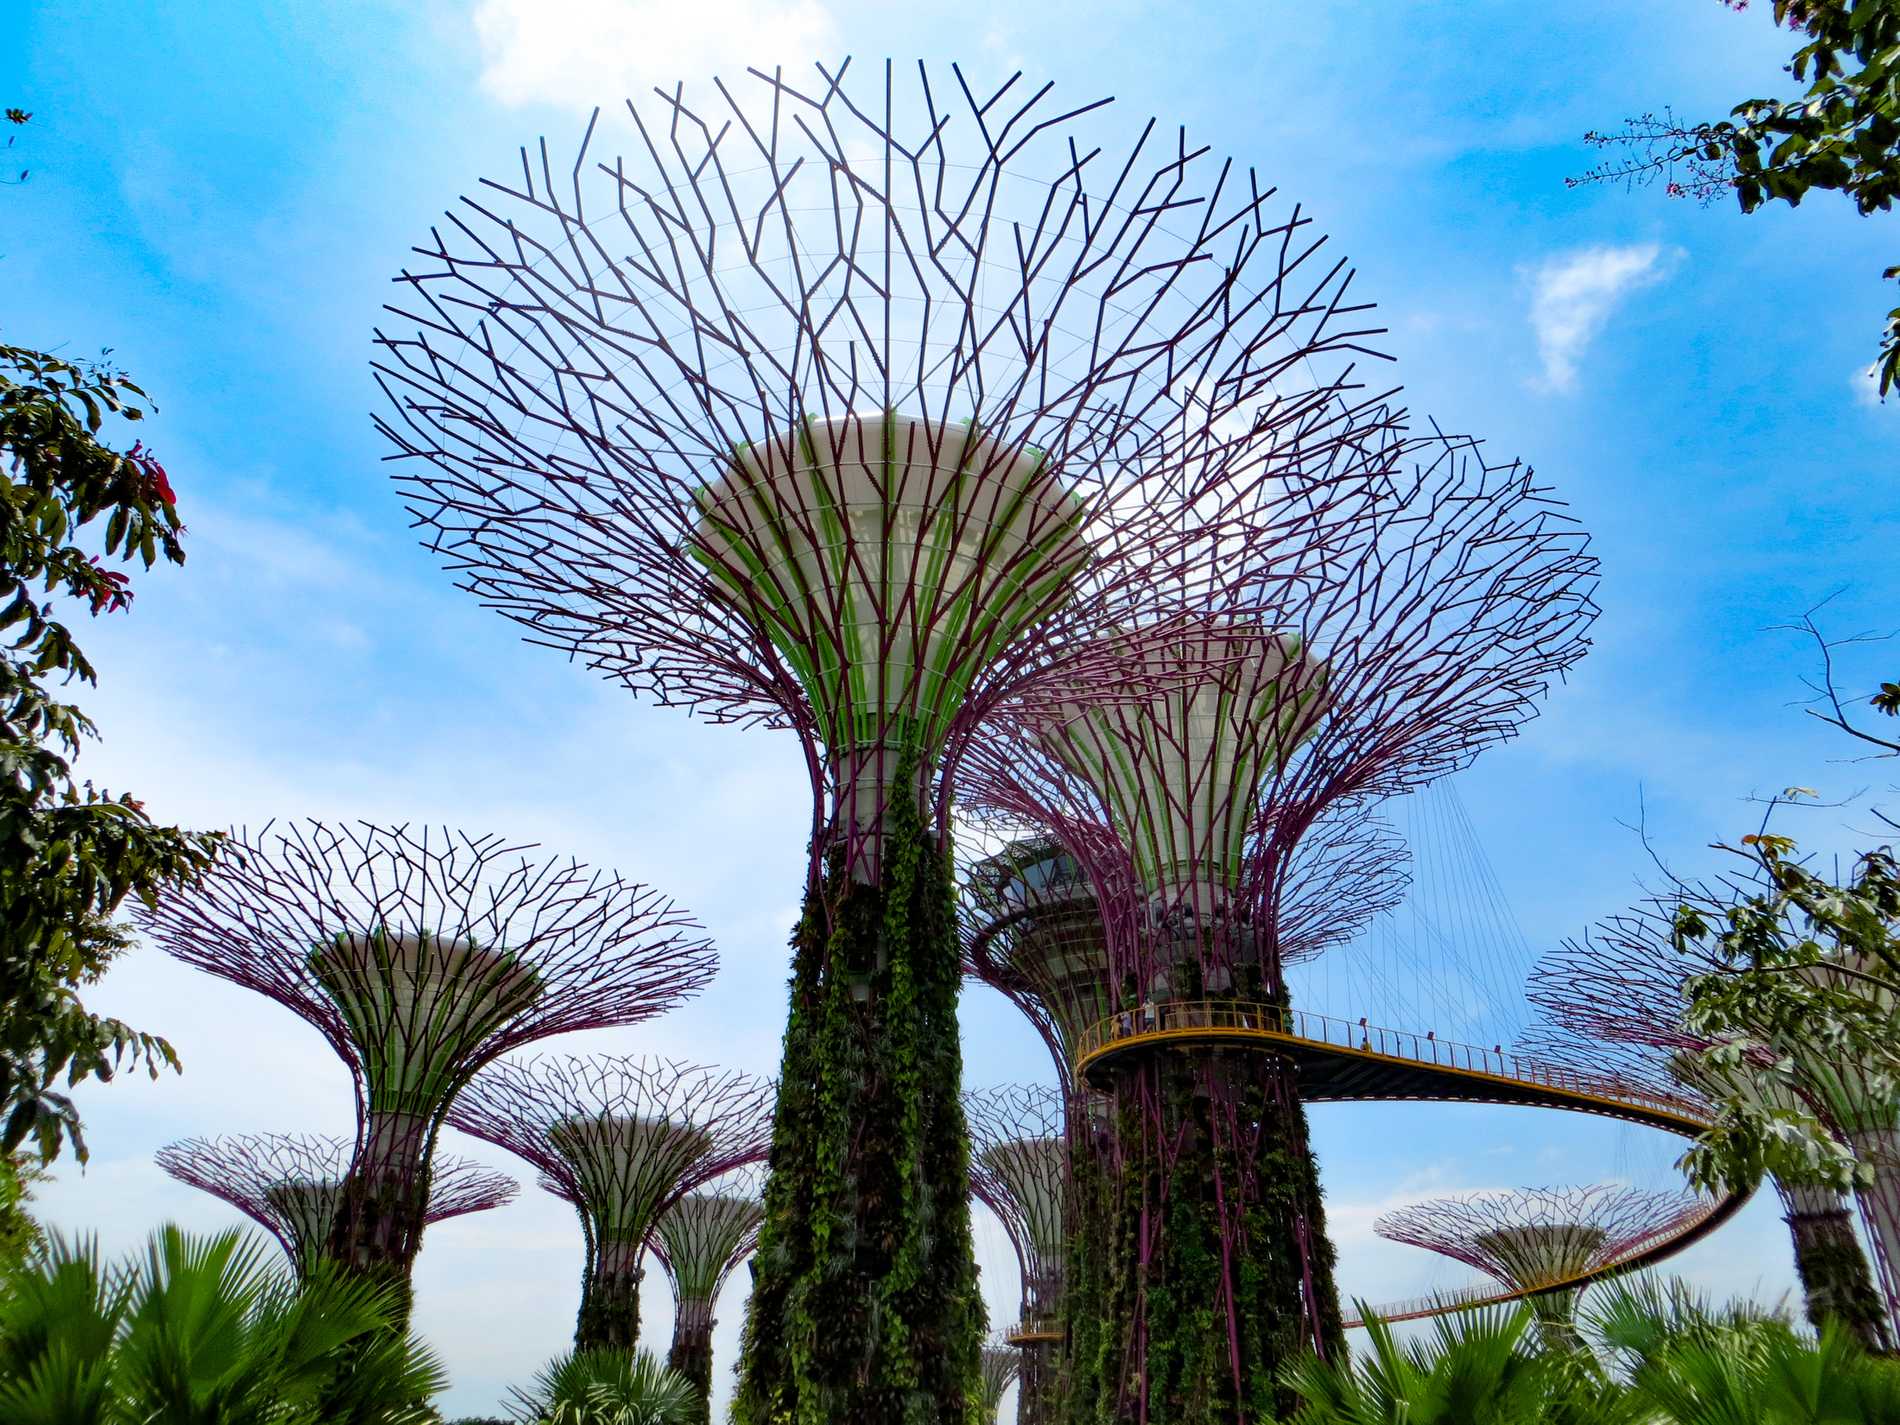 Measuring between 25 and 50 metres tall, Gardens by the Bay's Supertrees provide shade in the scorching heat.